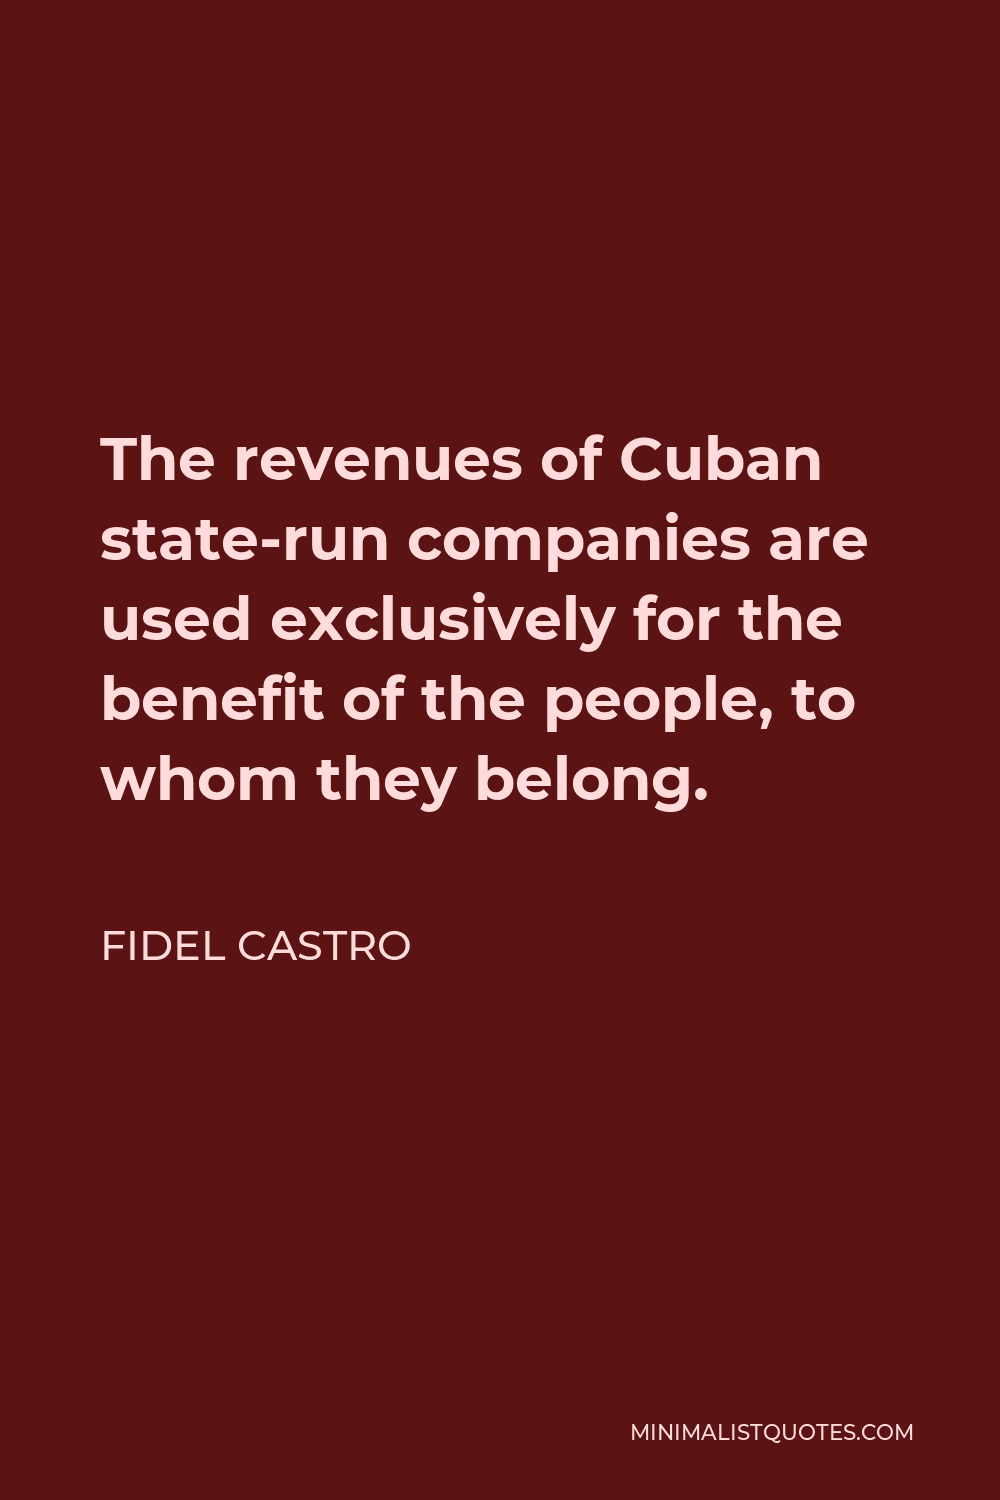 Fidel Castro Quote - The revenues of Cuban state-run companies are used exclusively for the benefit of the people, to whom they belong.